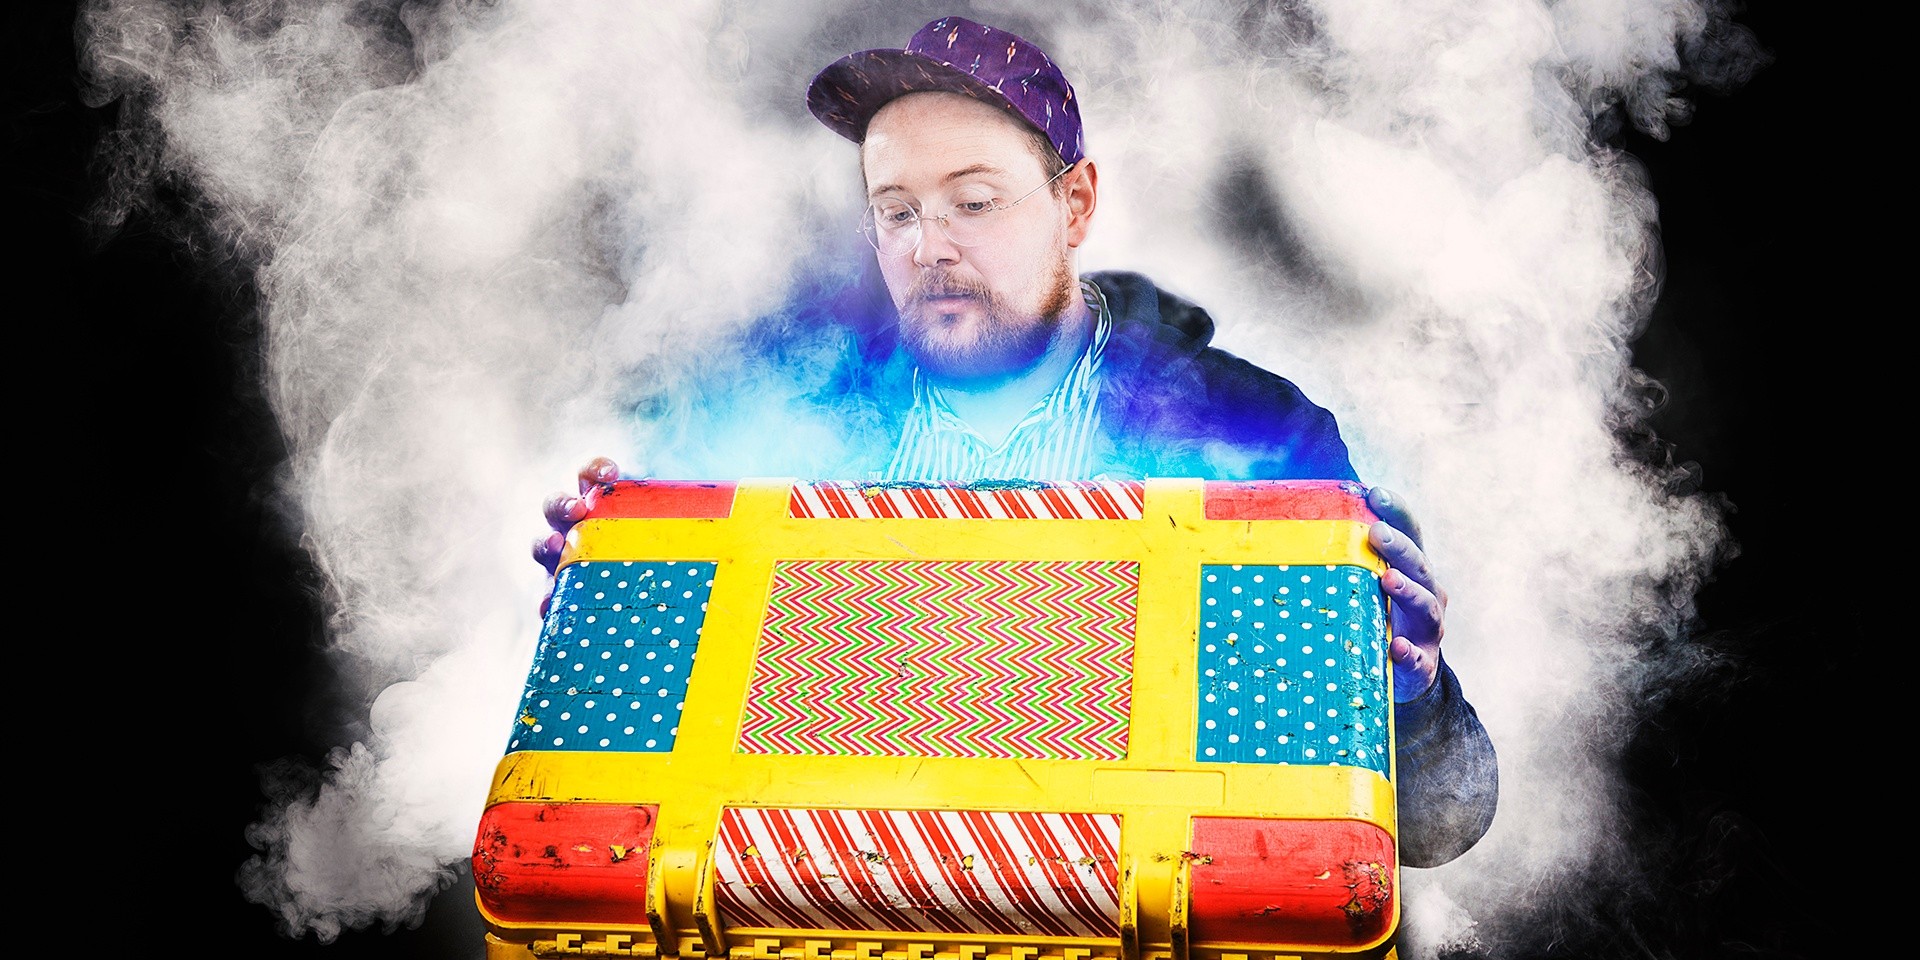 Electronic maestro Dan Deacon is coming to Singapore